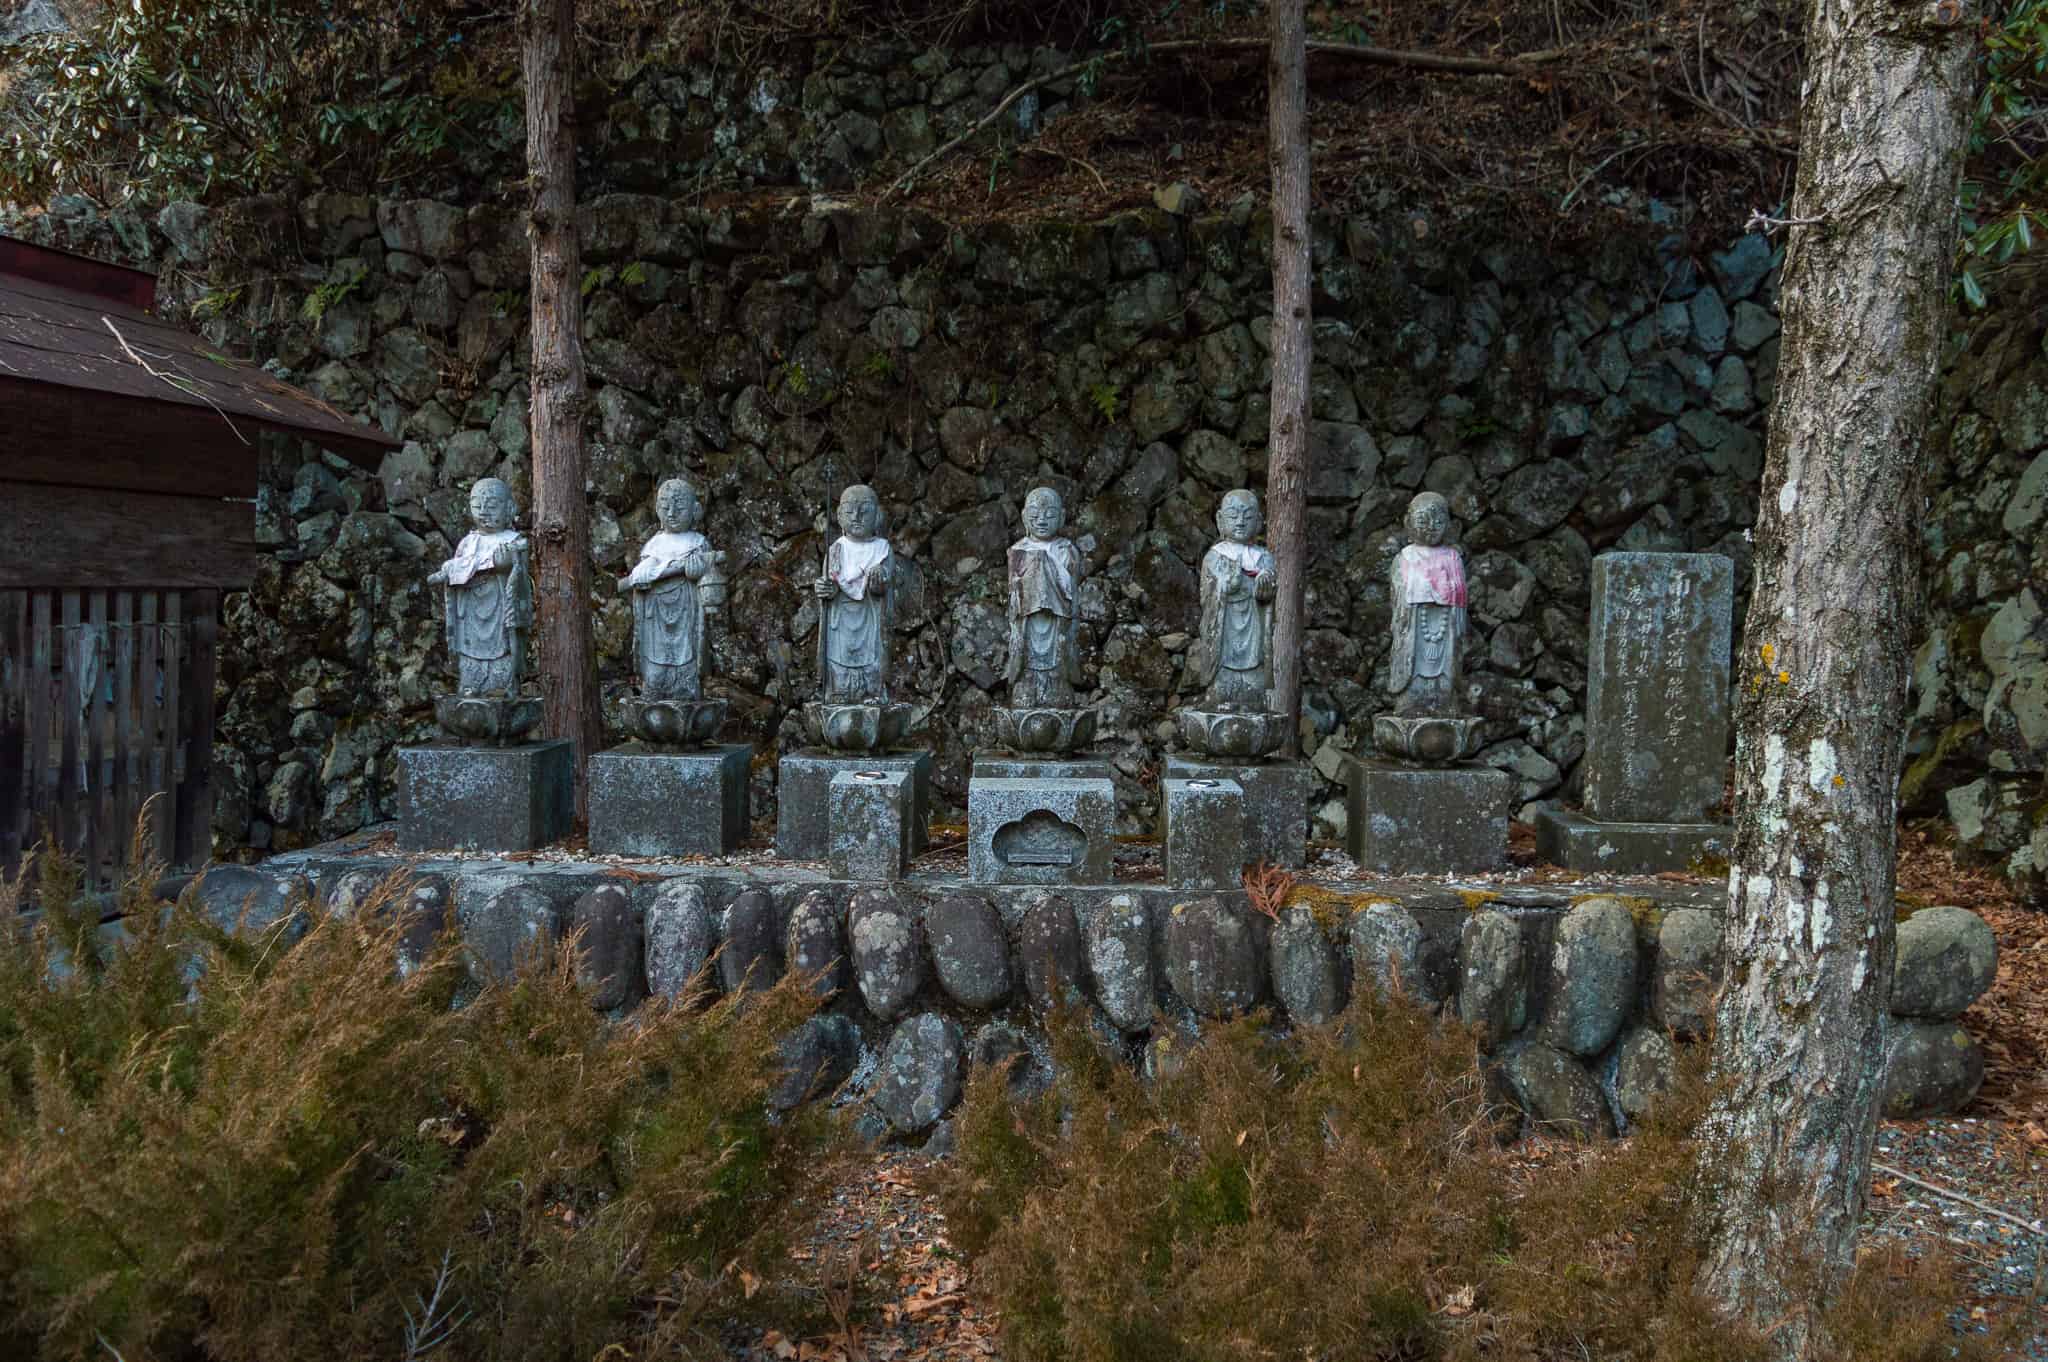 Statues lined up along a stone wall at Taiyoji Temple, Japan